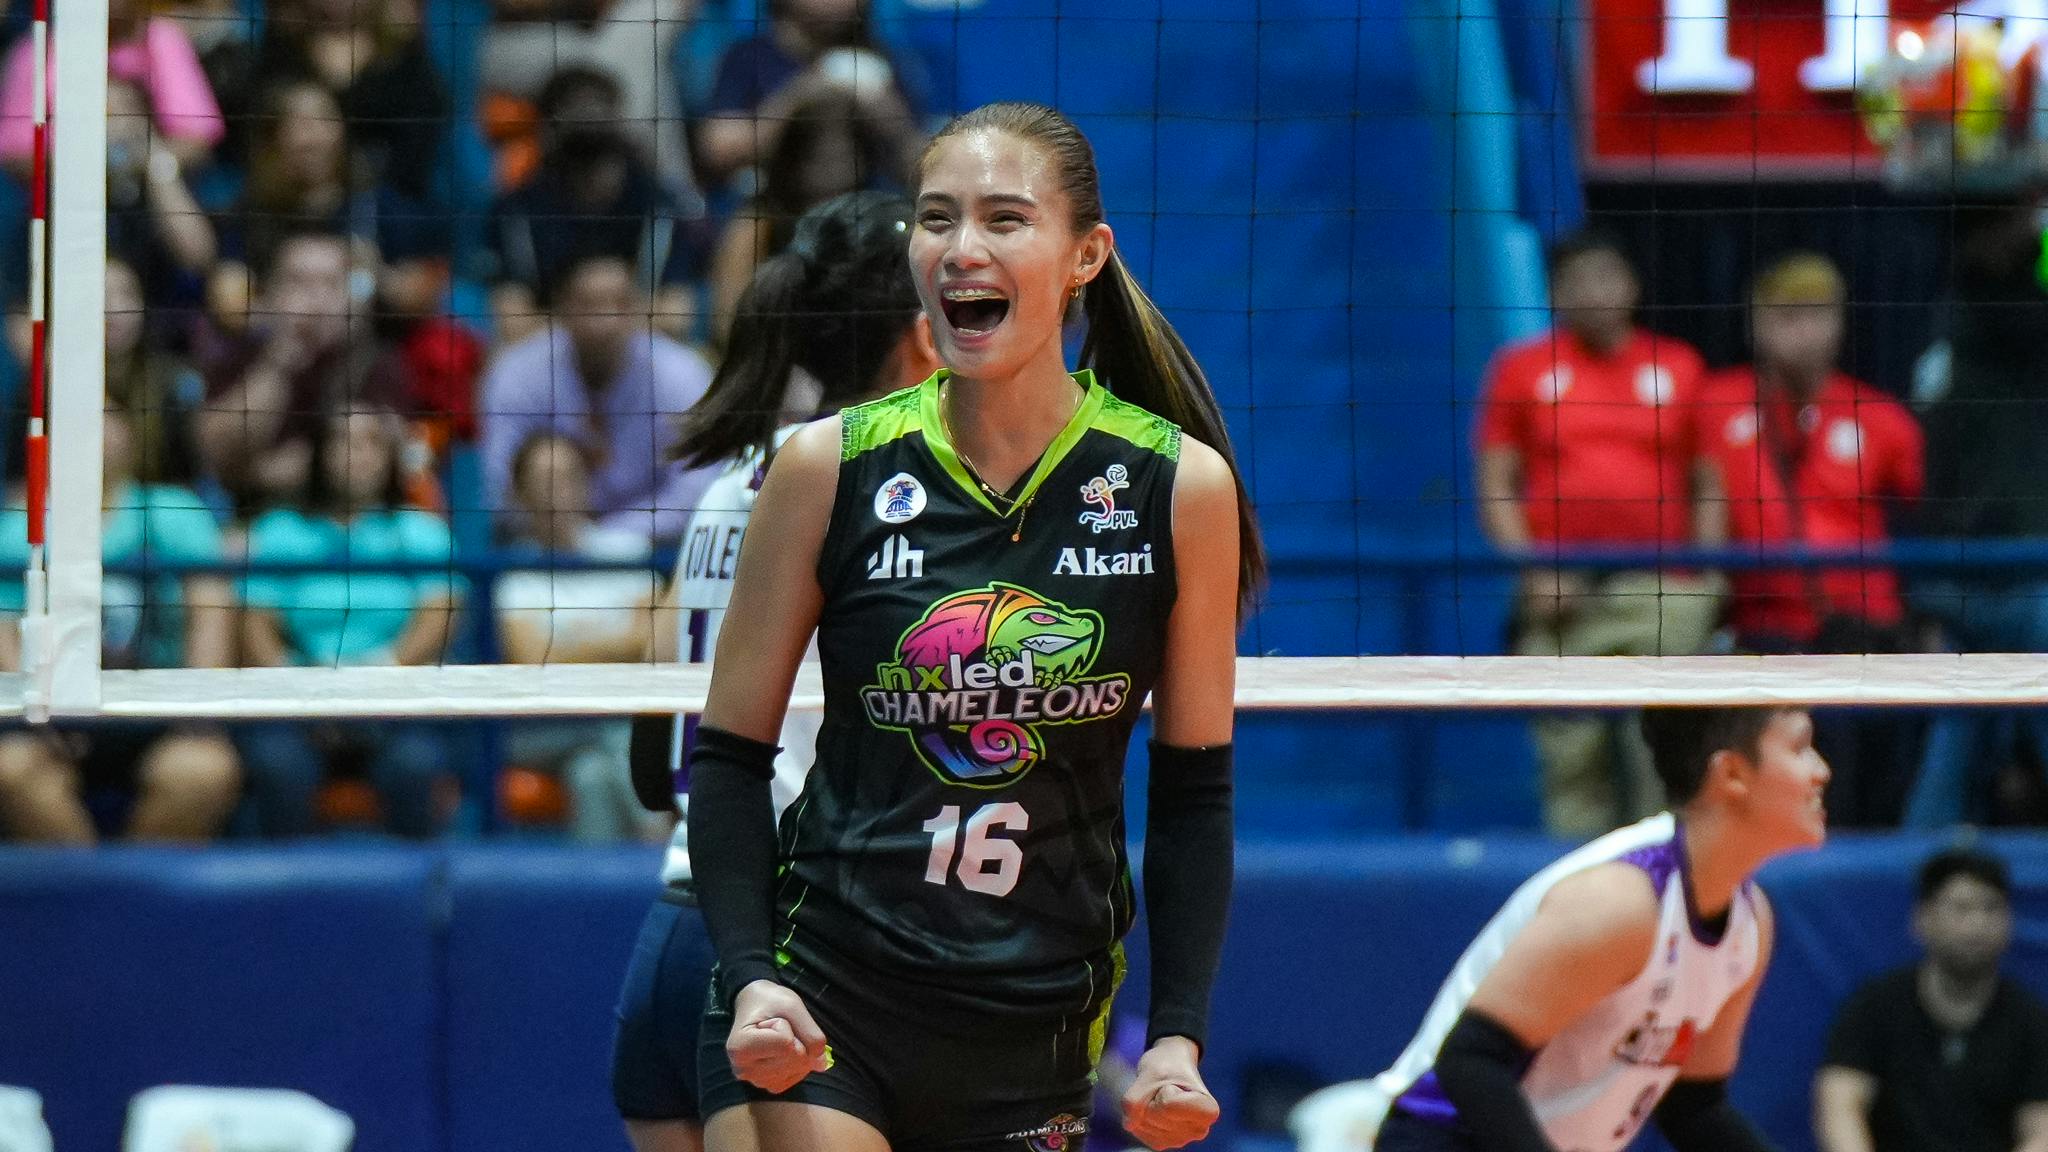 PVL: Ivy Lacsina shows resolve to lead in Nxled debut
